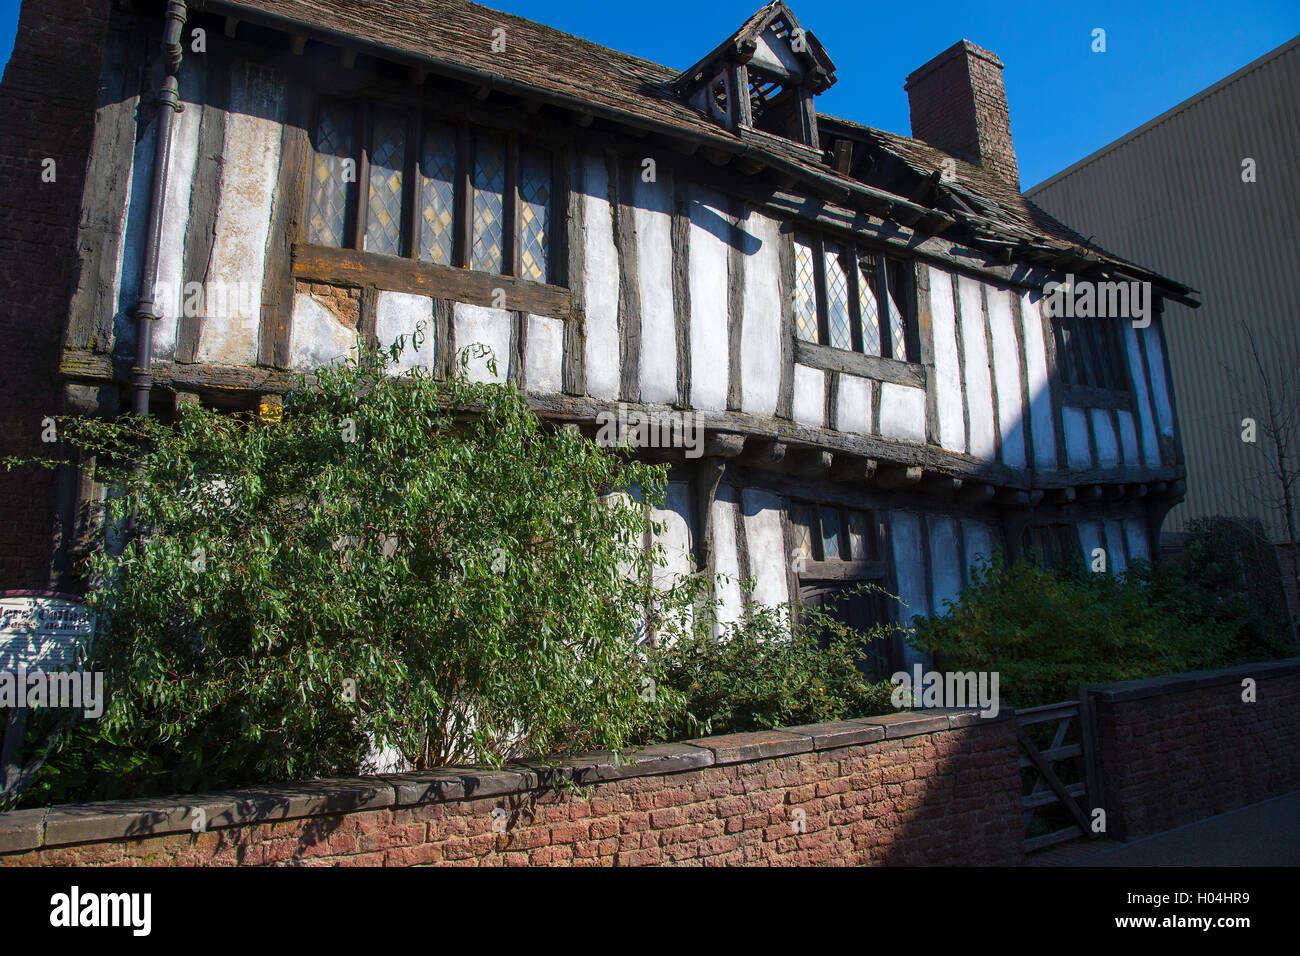 Potters' Cottage, Godric's Hollow, Warner Brothers Studio Tour, The Making of Harry Potter, London Stock Photo